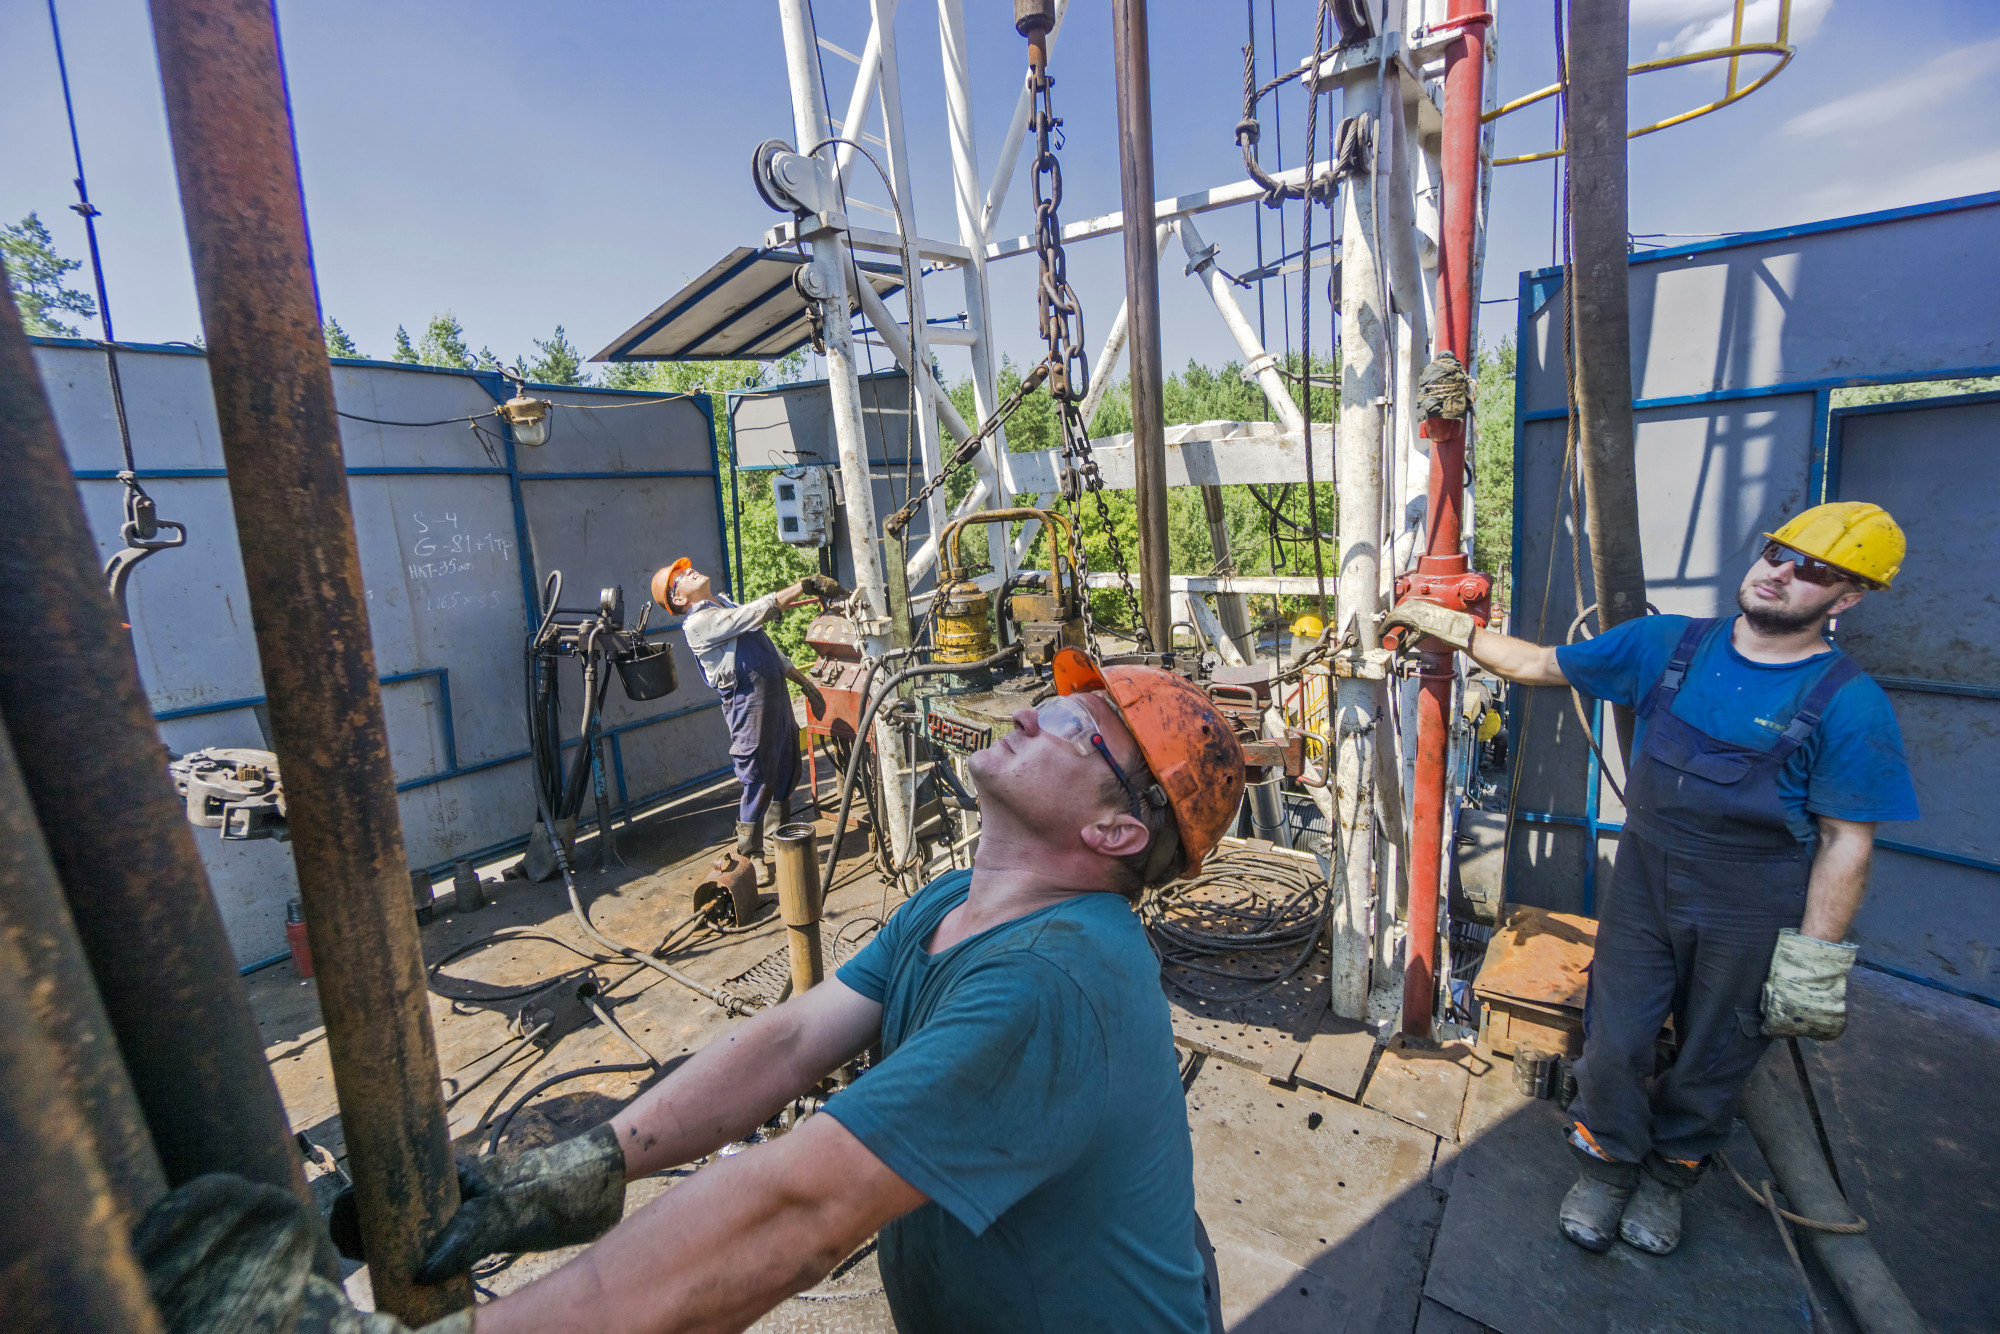 A worker selects a drill tube on a gas rig during drilling operations by DK Ukrgazvydobuvannya (UGV), a unit of NAK Naftogaz Ukrainy, in Poltava, Ukraine, on Friday, July 21, 2017. Investors wanting to take the temperature of Ukraines reform drive could do worse than look in on state-run energy firm Naftogaz, where a battle for control underscores the obstacles hampering wider efforts to clean up the ex-communist economy. Photographer: Vincent Mundy/Bloomberg